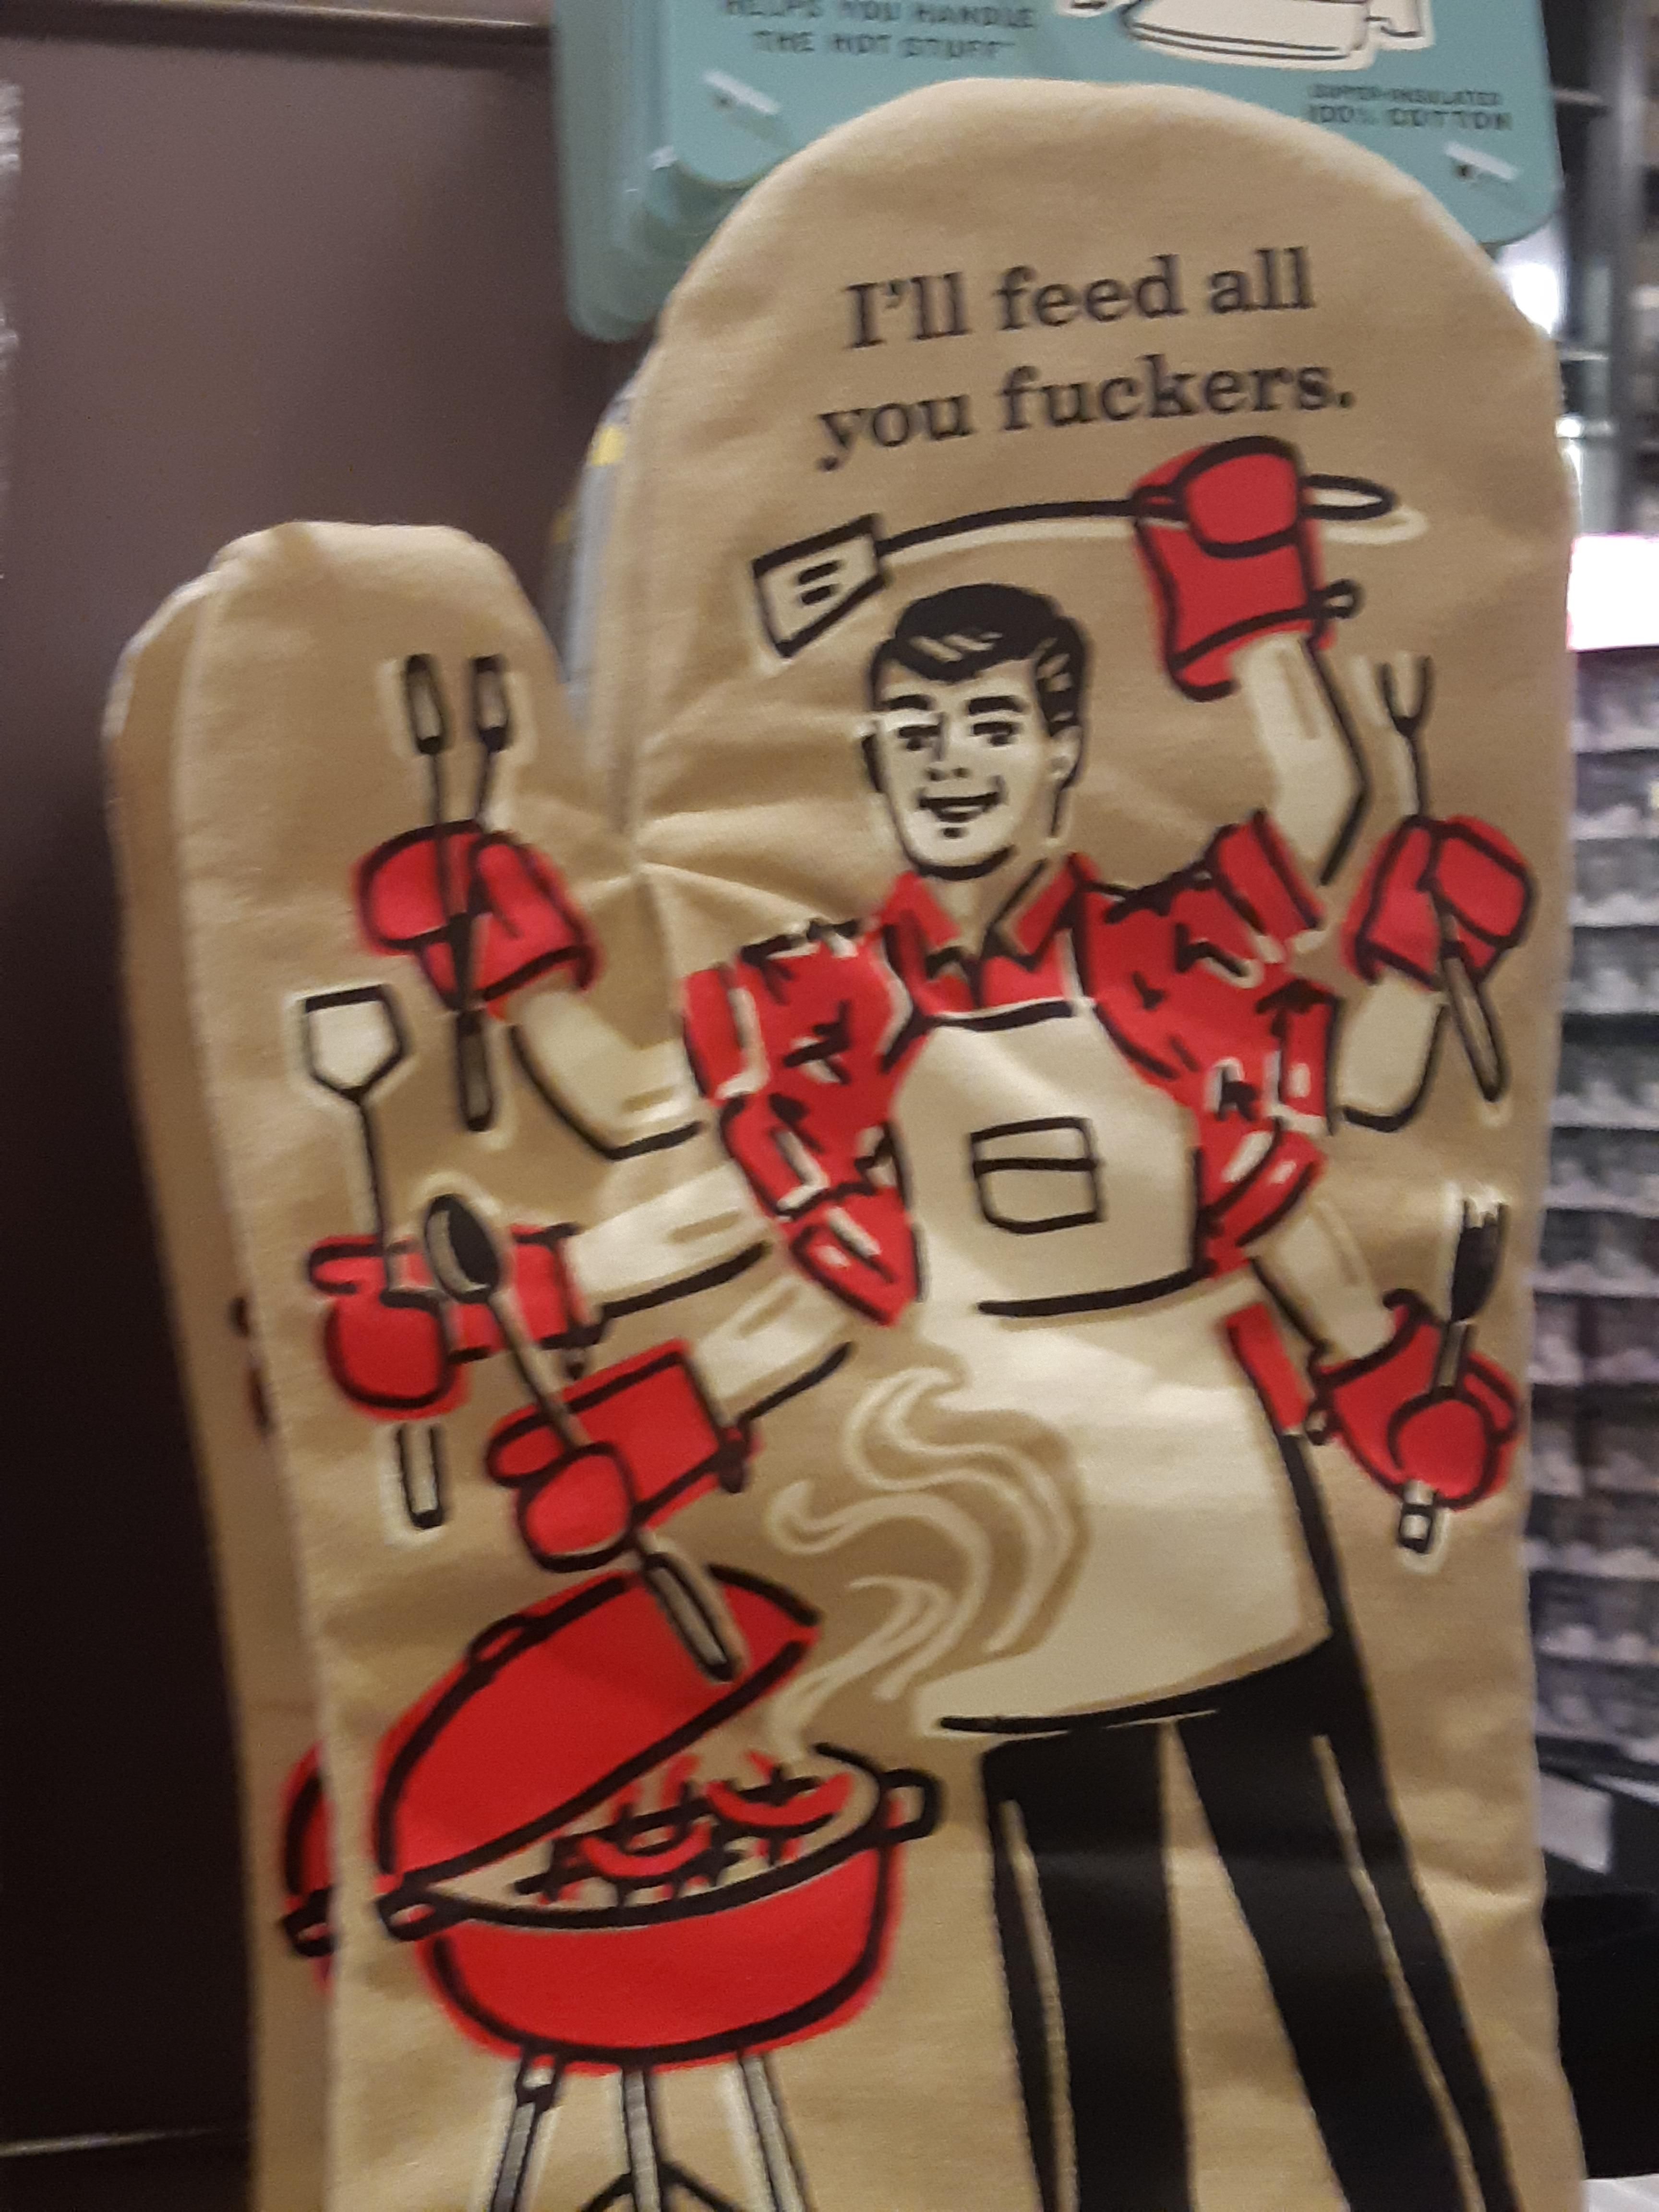 These oven mitts